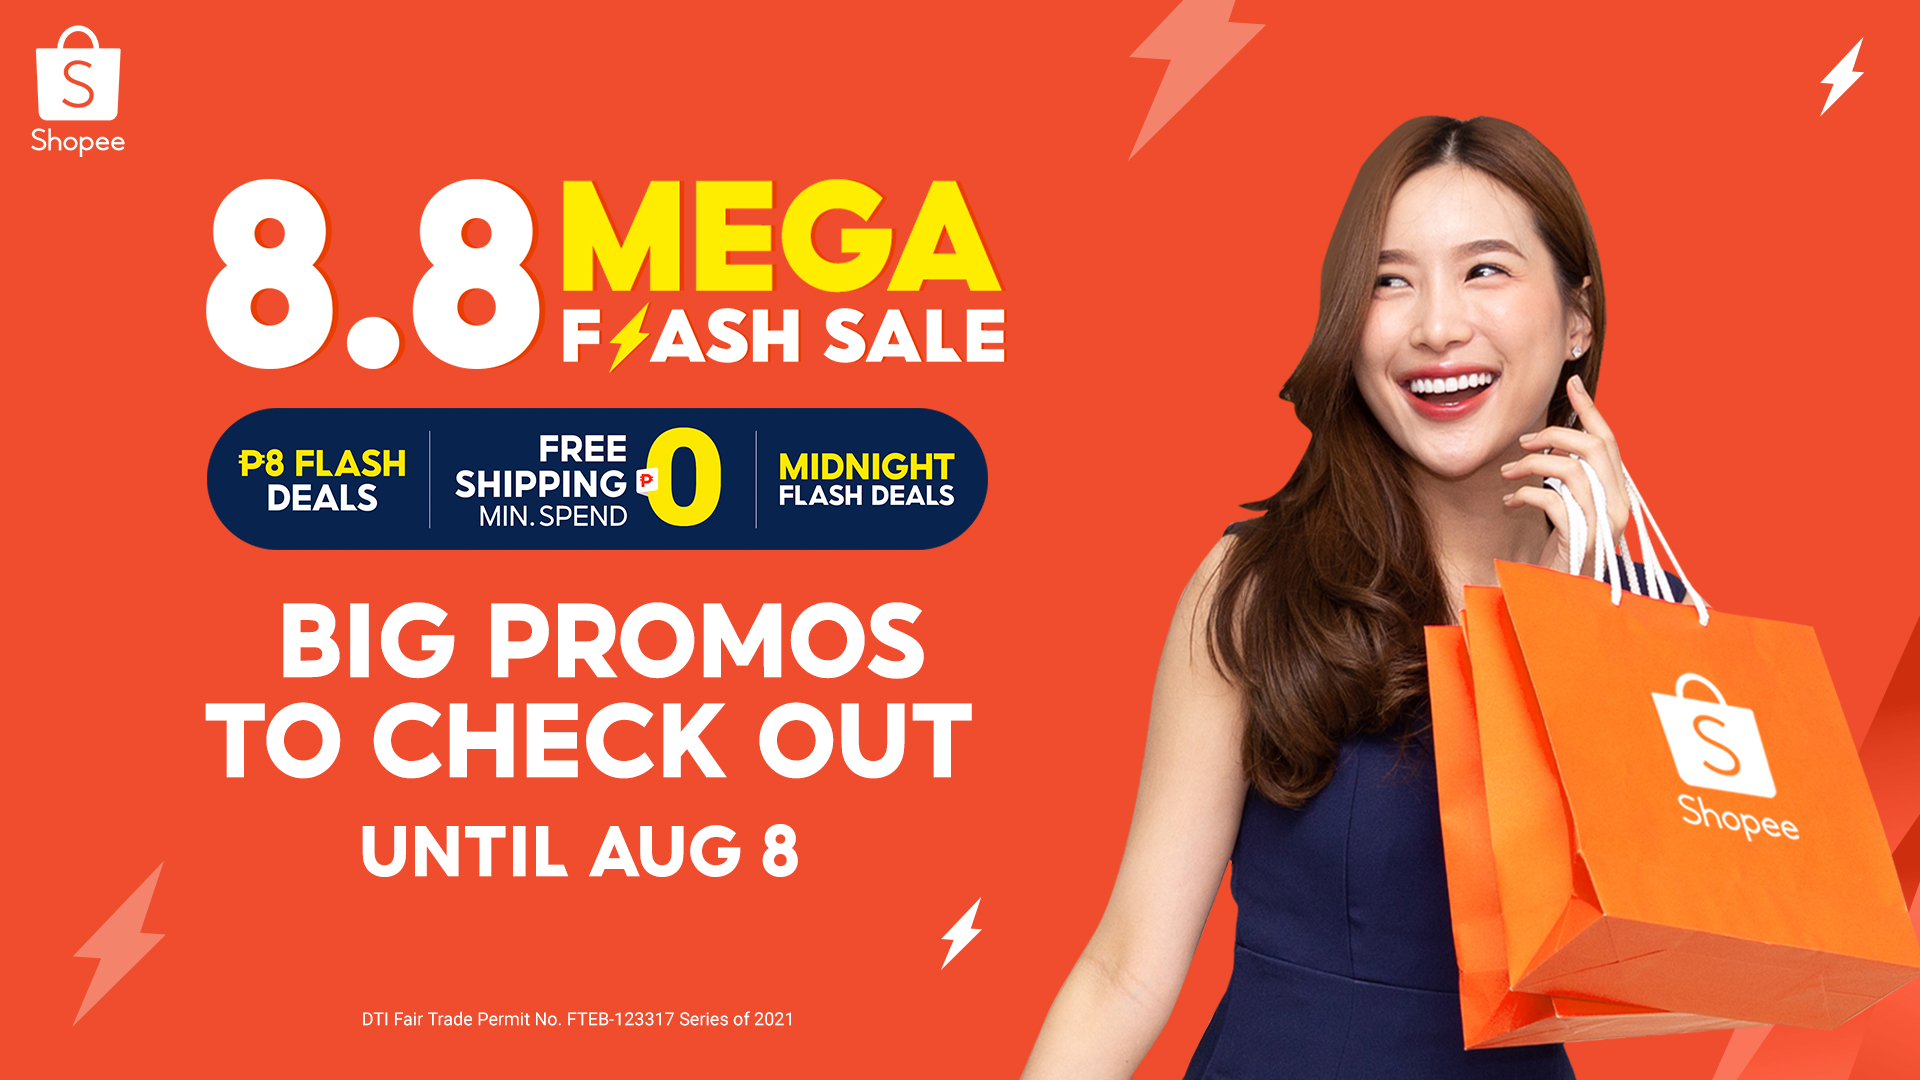 Big Promos to Check Out at the Shopee 8.8 Mega Flash Deals Sale